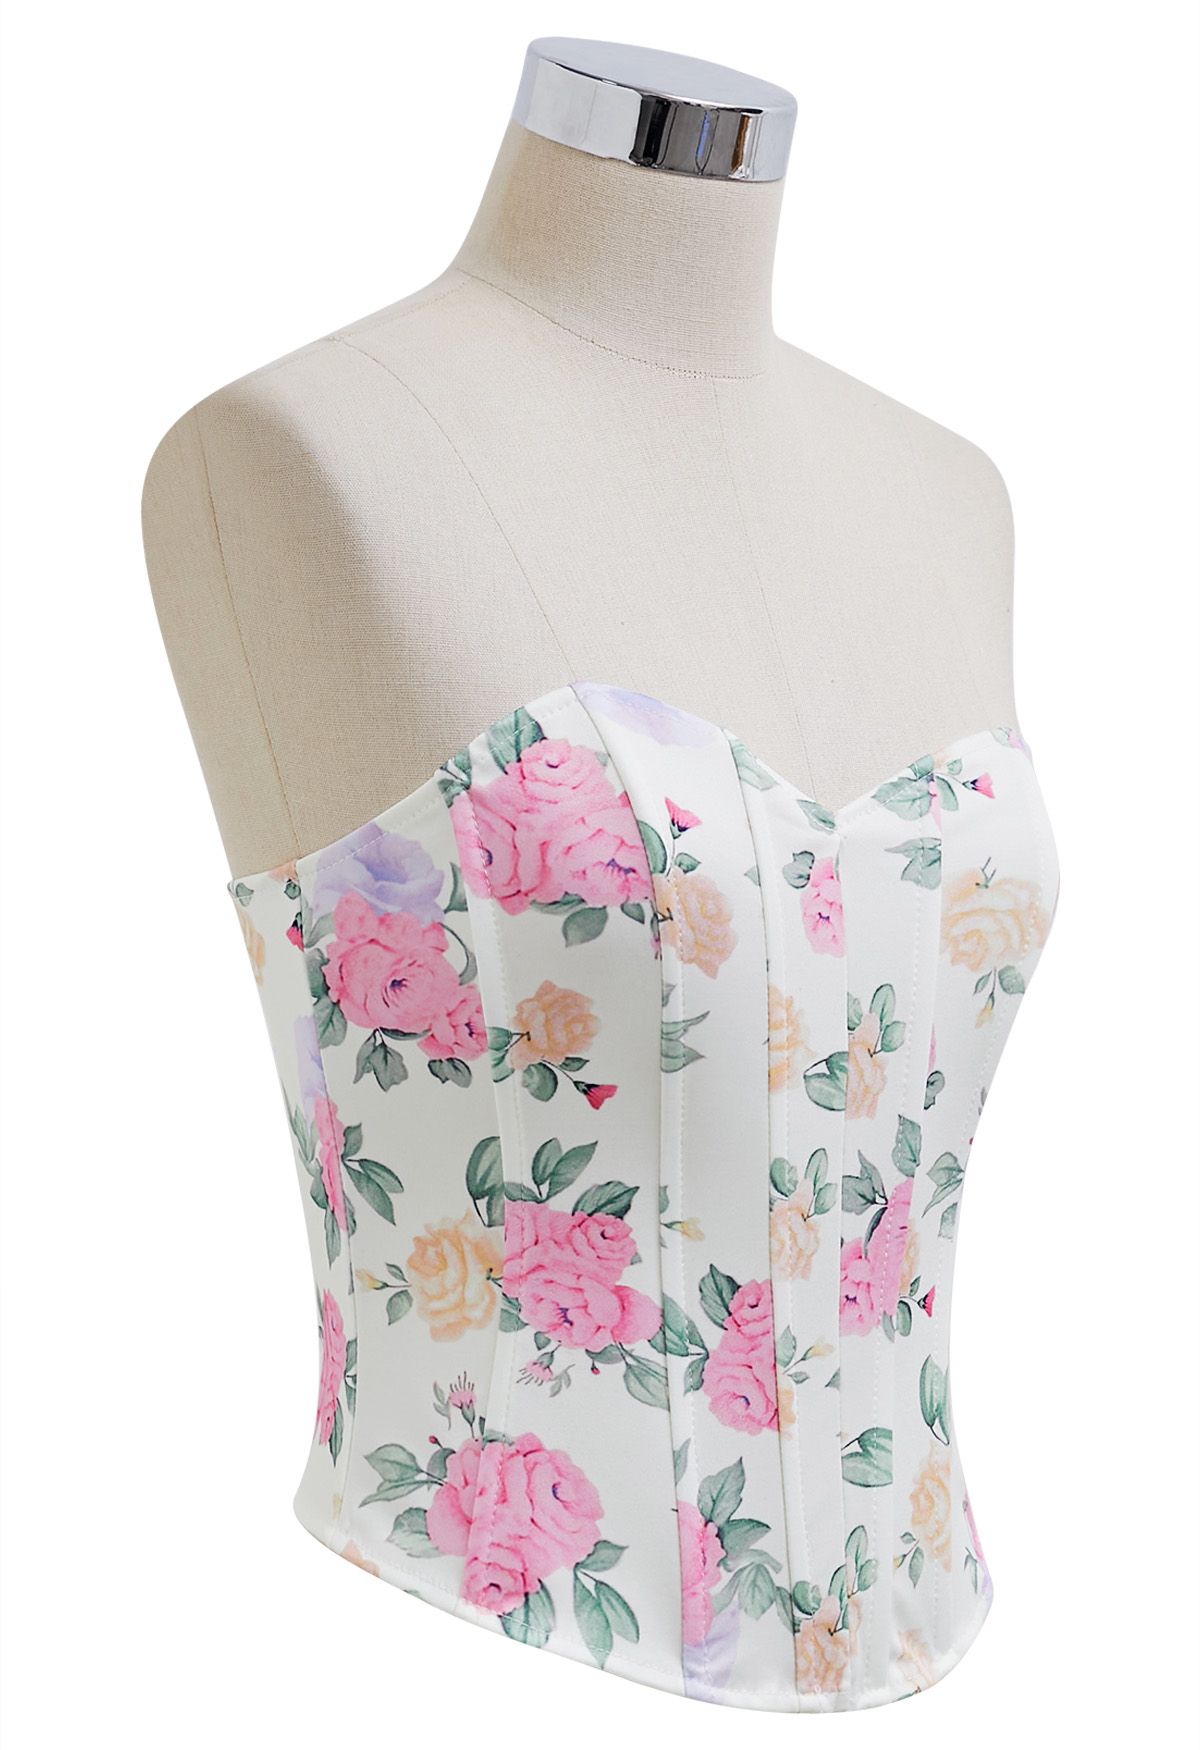 Floral Printed Corset Bustier Top in Ivory